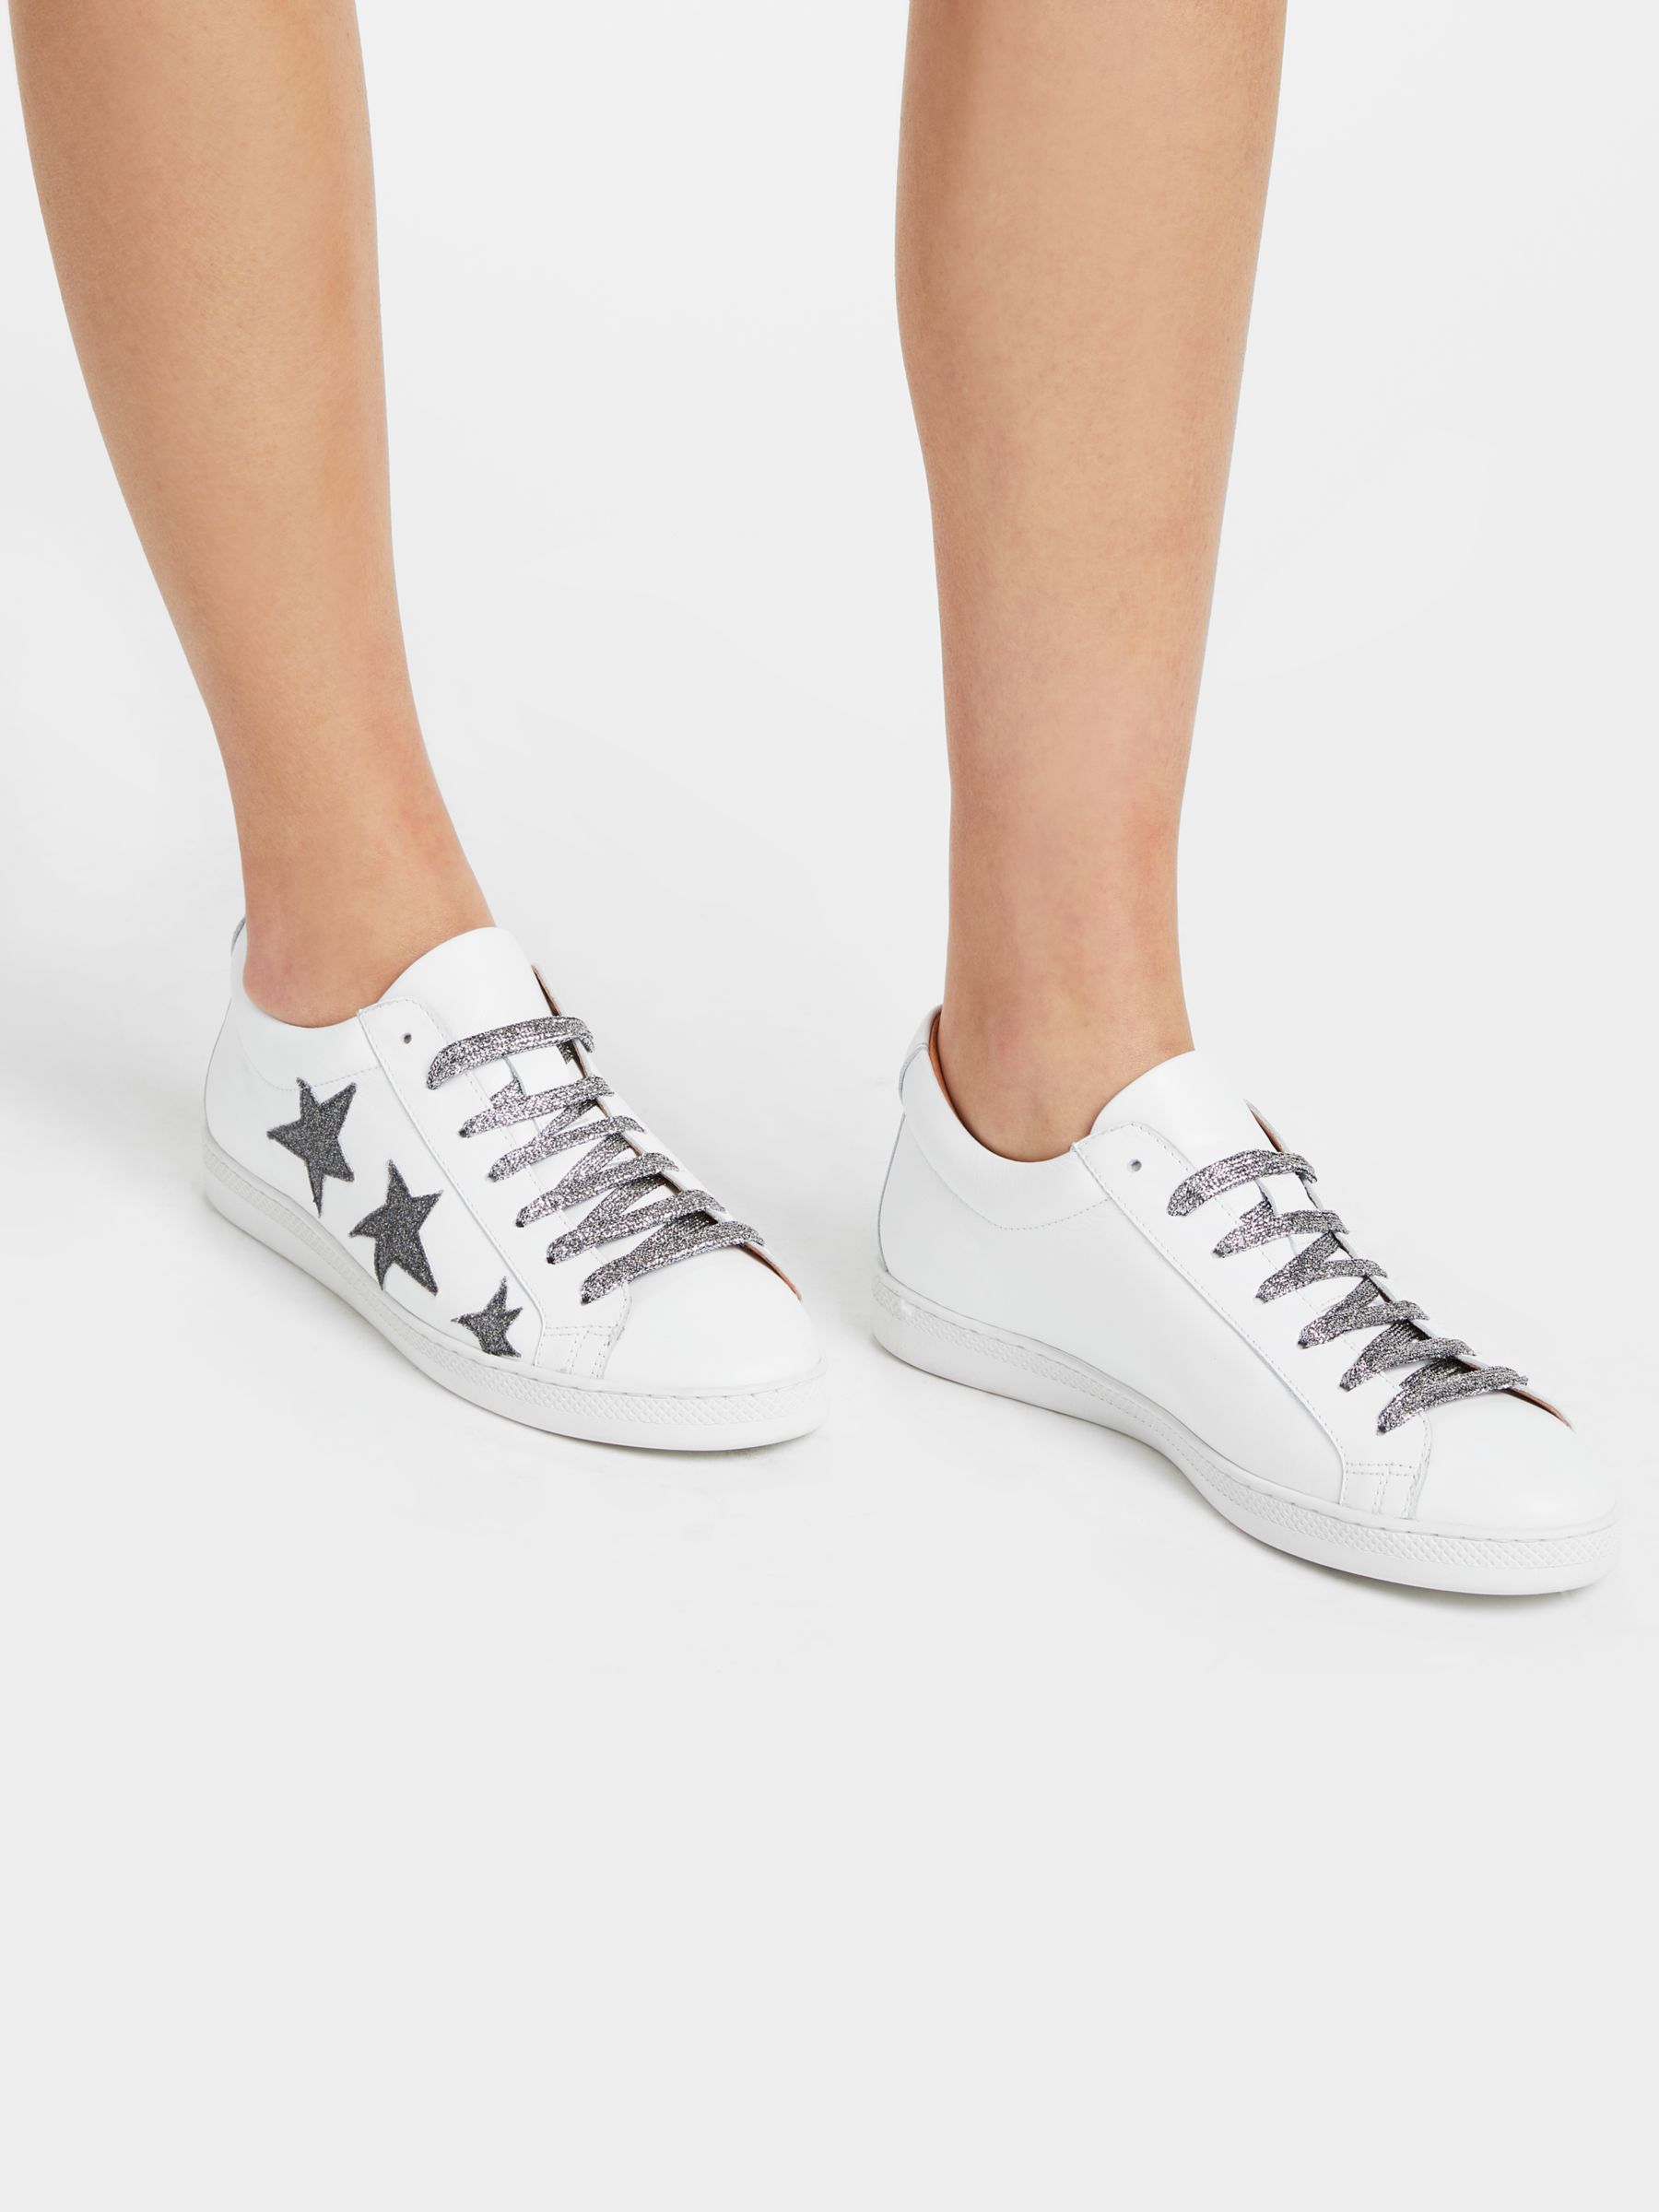 AND/OR Ezra Star Trainers, White at 